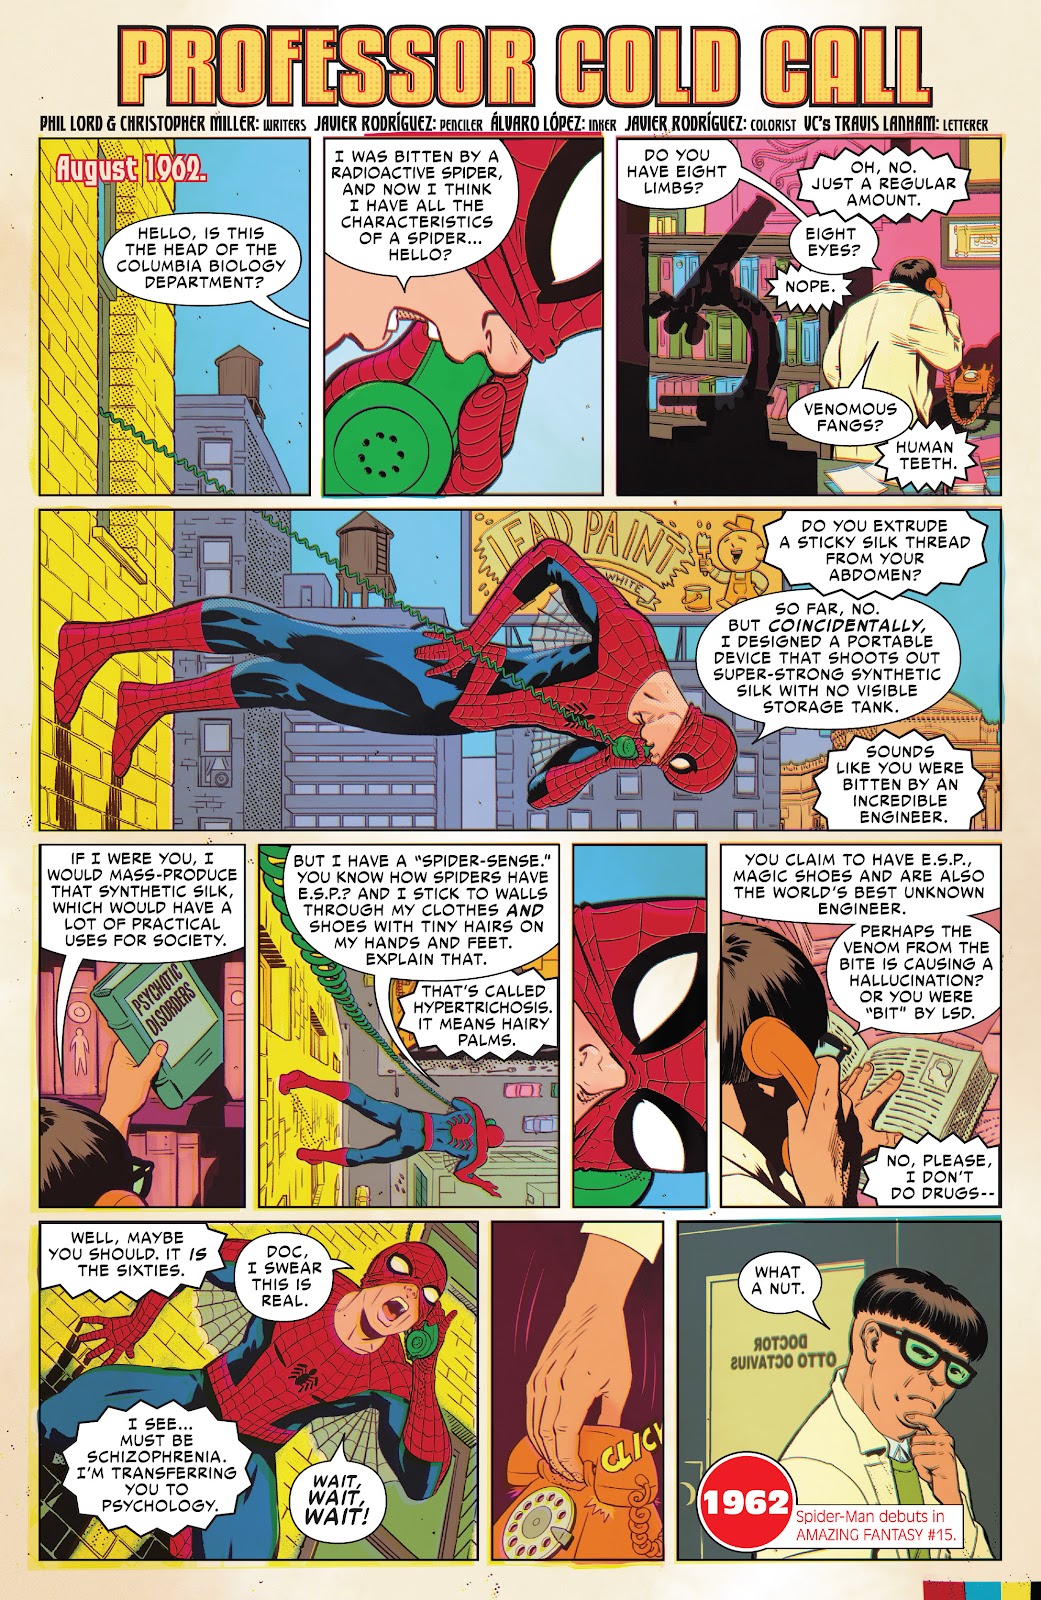 Marvel Comics (2019) issue 1000 - Page 26